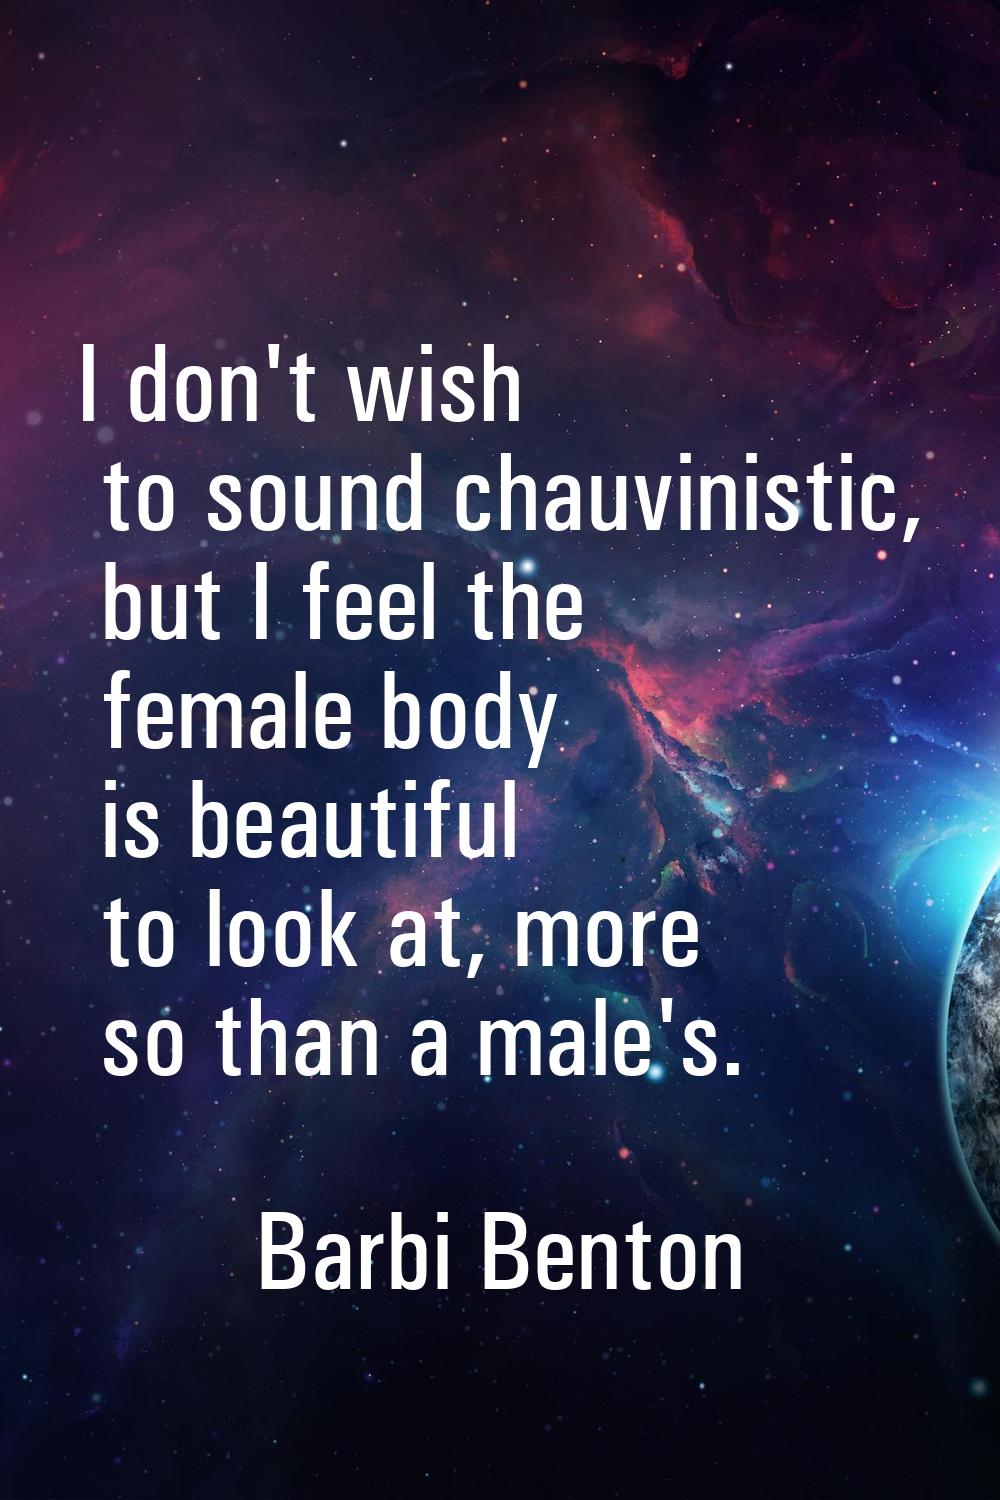 I don't wish to sound chauvinistic, but I feel the female body is beautiful to look at, more so tha